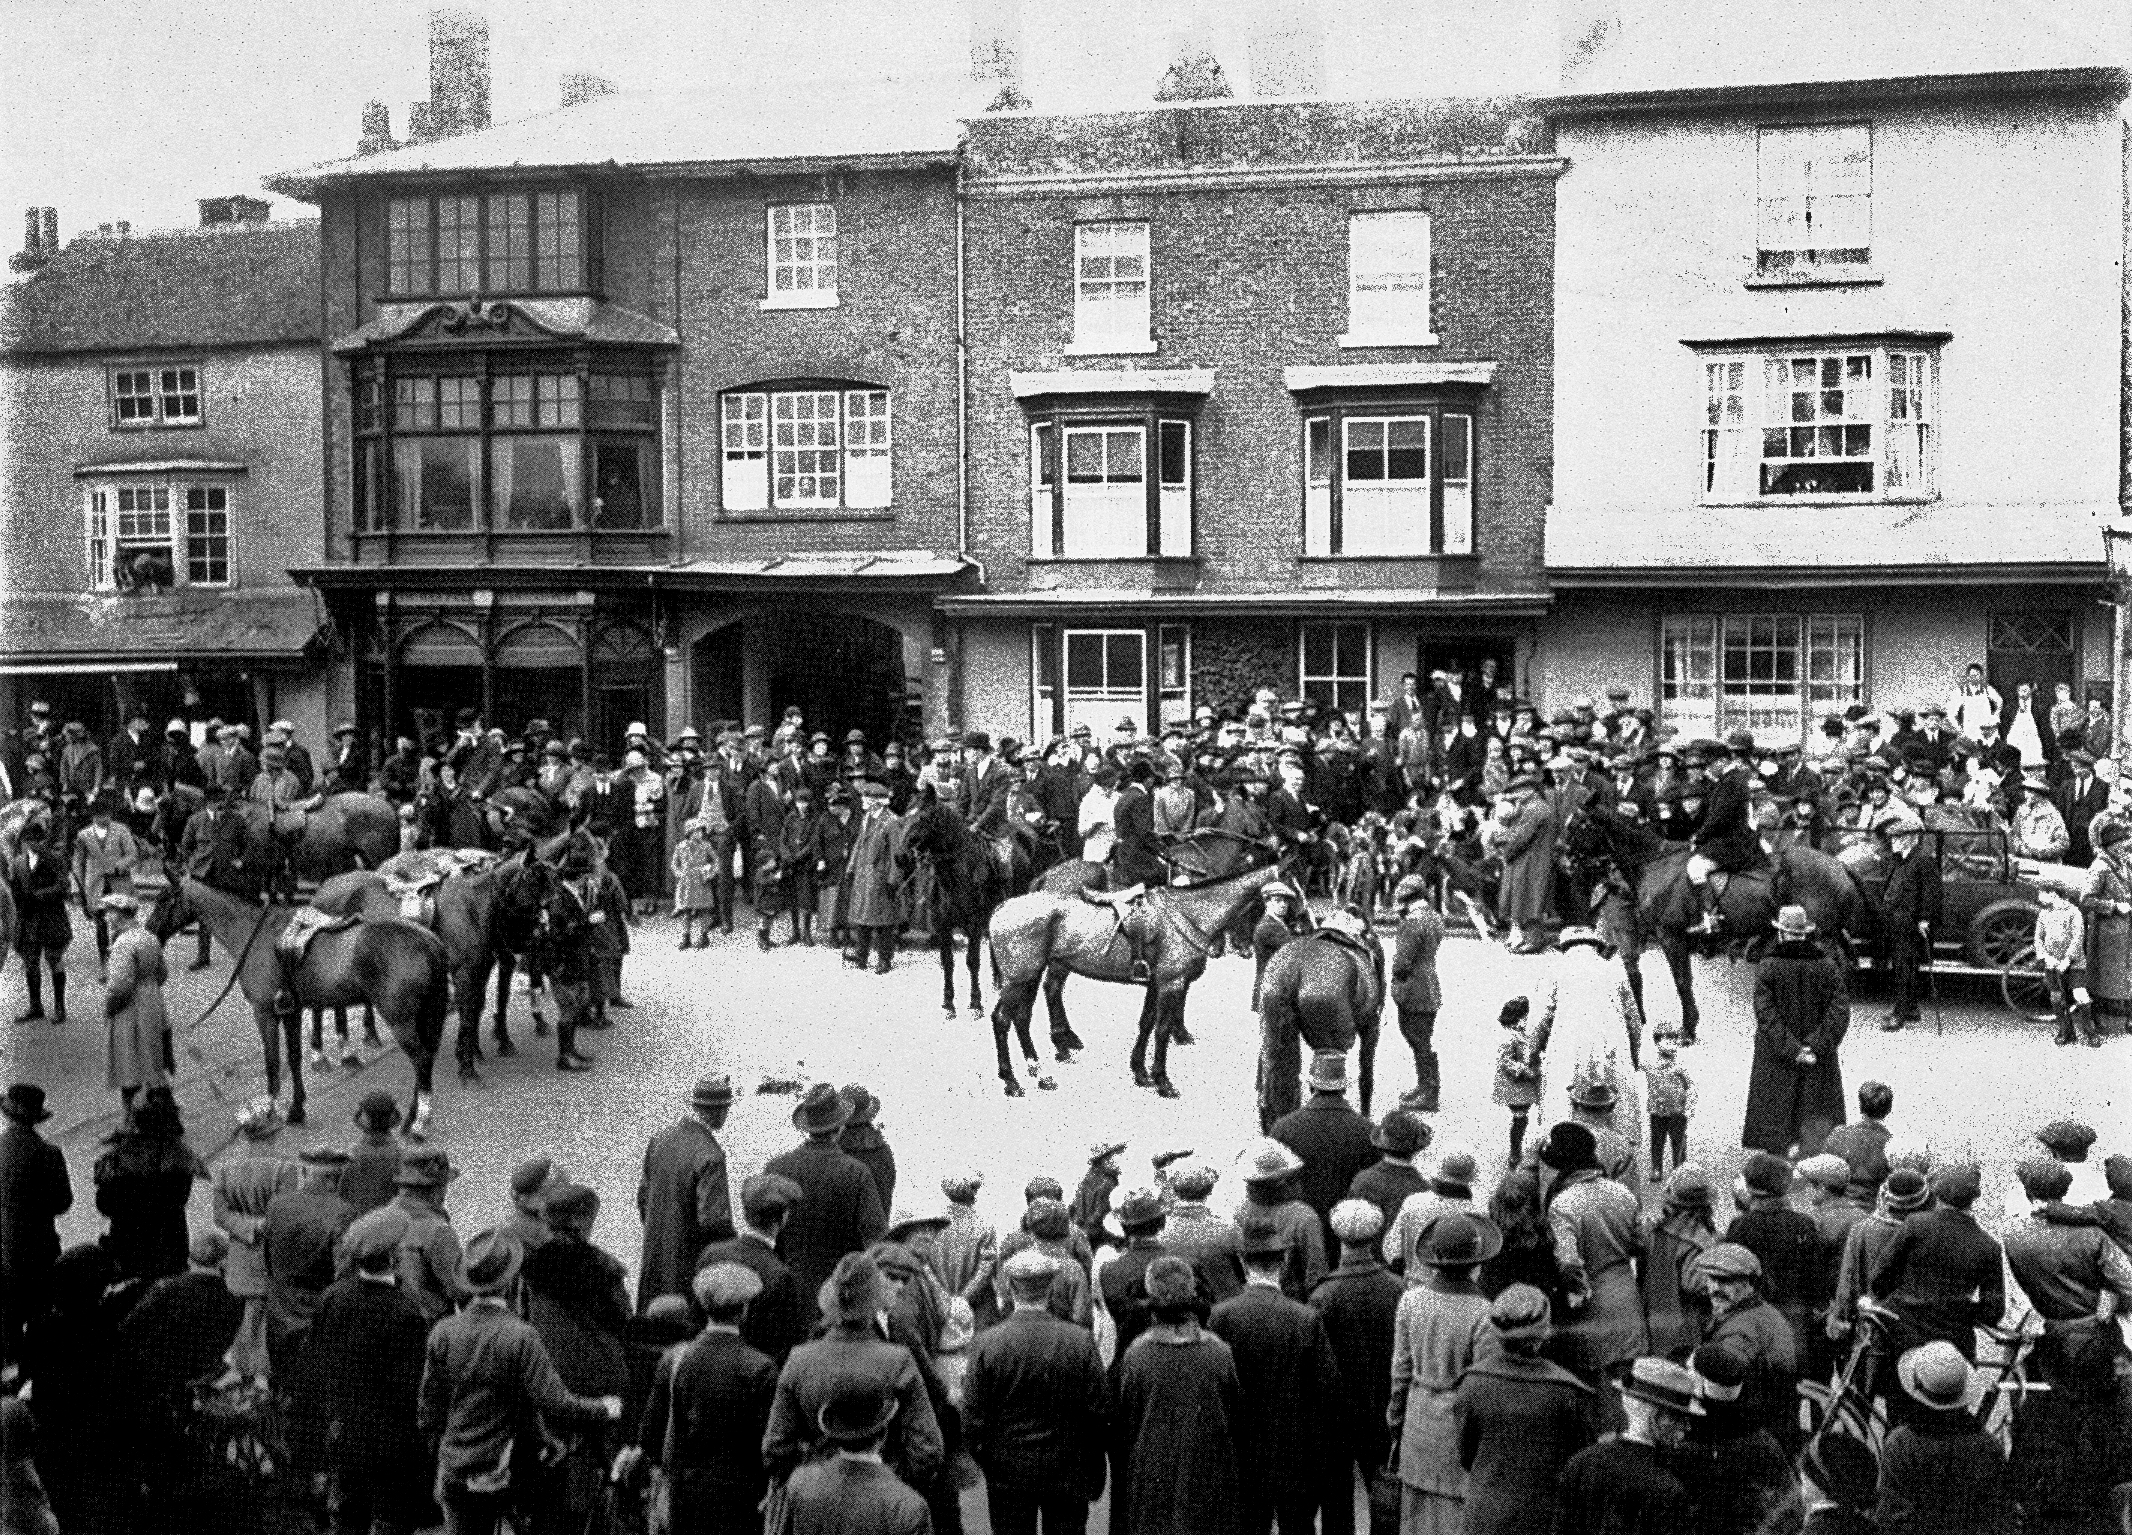 A meet of either the Tedworth or Craven Hunt in the High Street in the 1920s